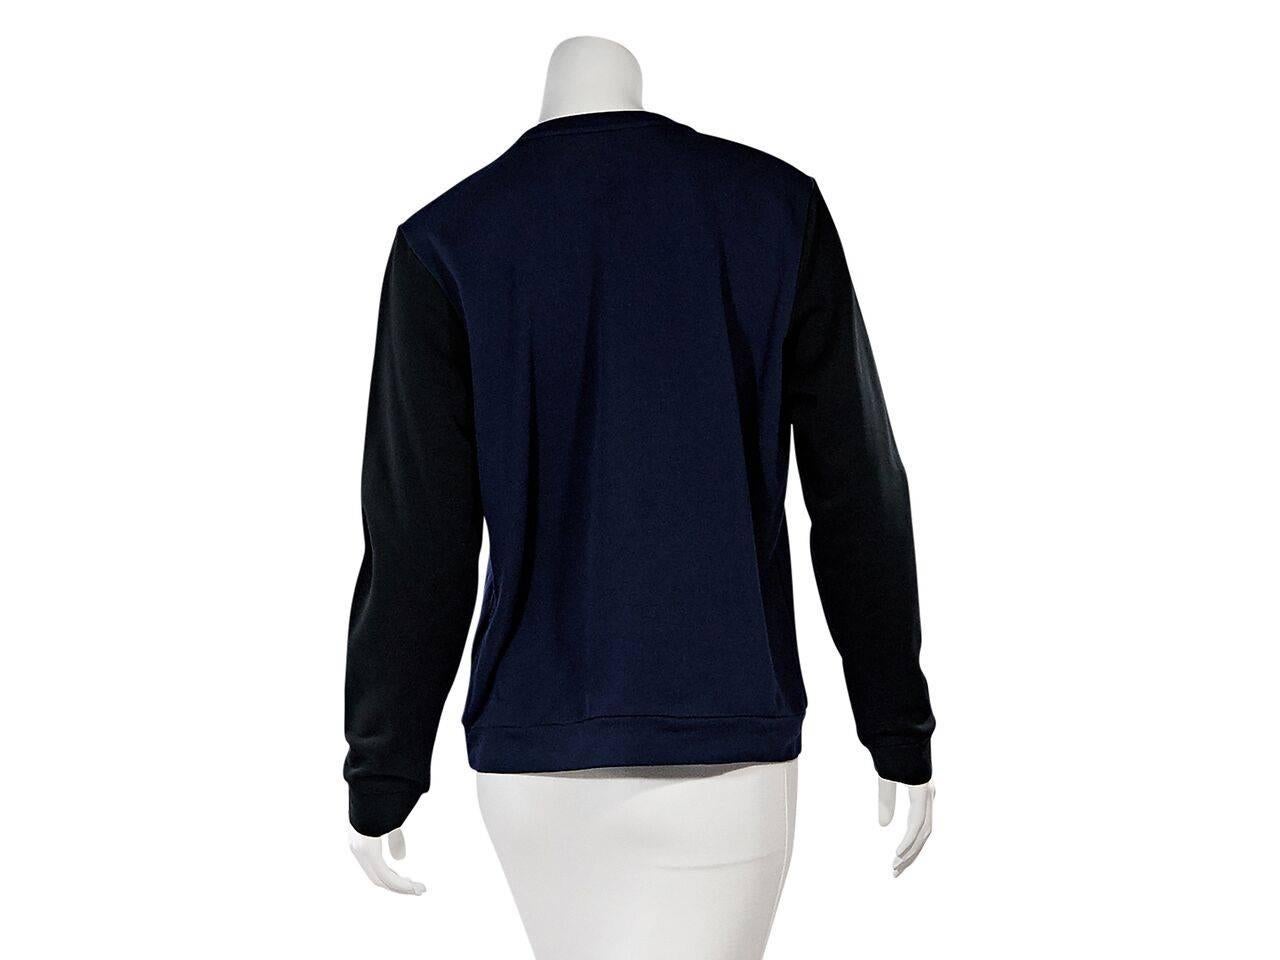 Product details:  Navy blue and black embellished sweatshirt by Lanvin.  Embellished with a tassel rope accents.  Crewneck.  Long sleeves.  Ribbed cuffs.  Pullover style.   
Condition: Pre-owned. Very good.
Est. Retail $ 748.00